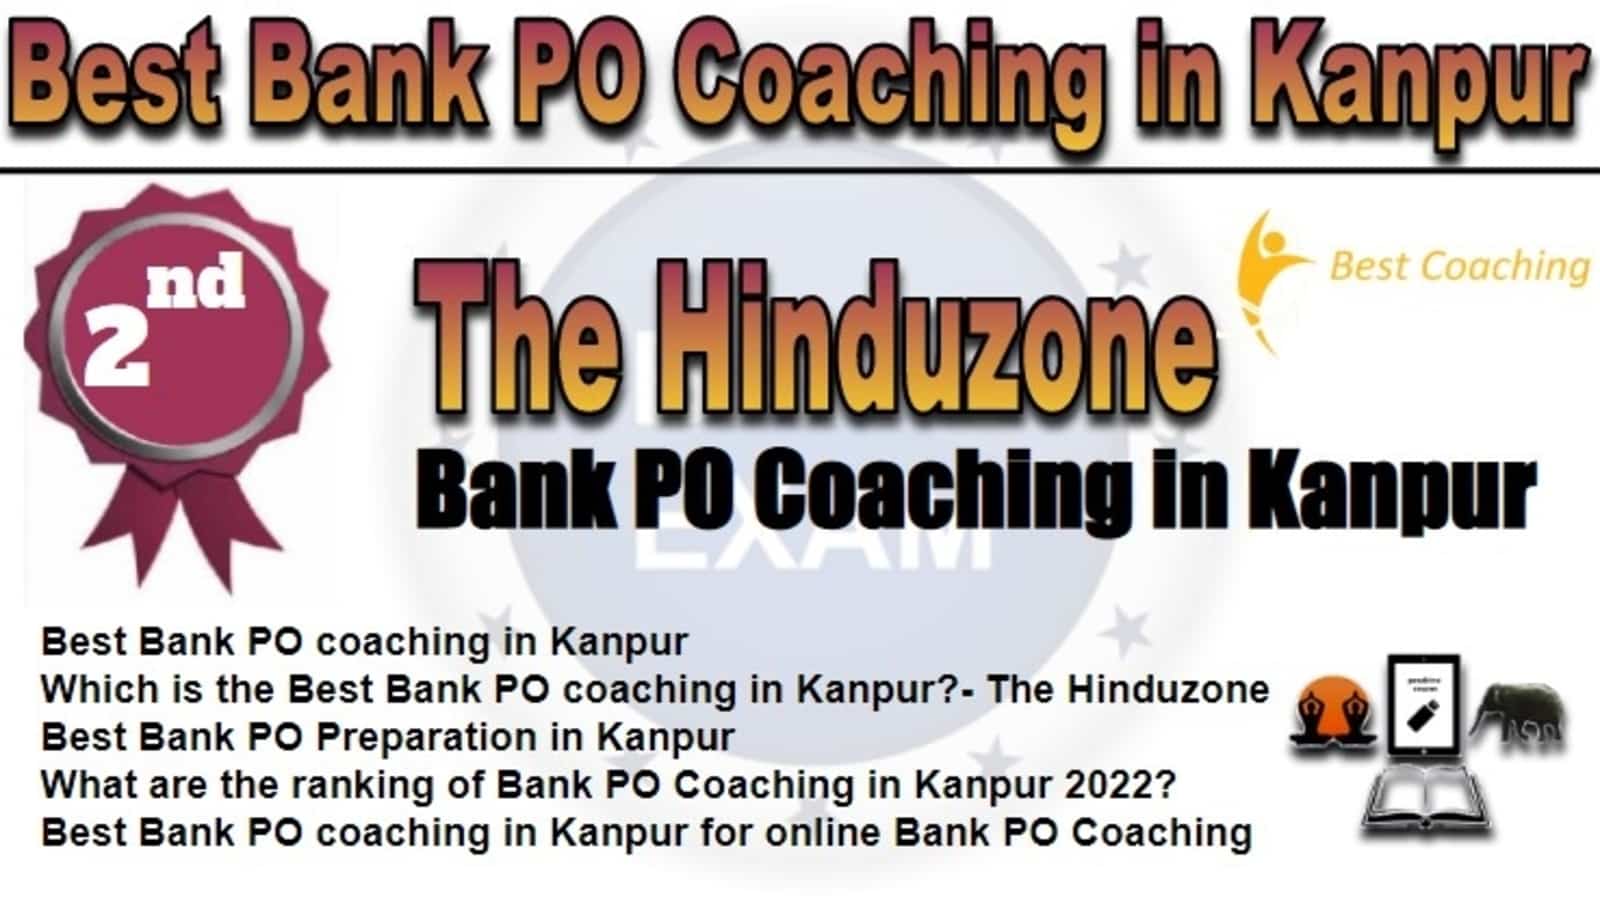 Rank 2 Best Bank PO Coaching in Kanpur